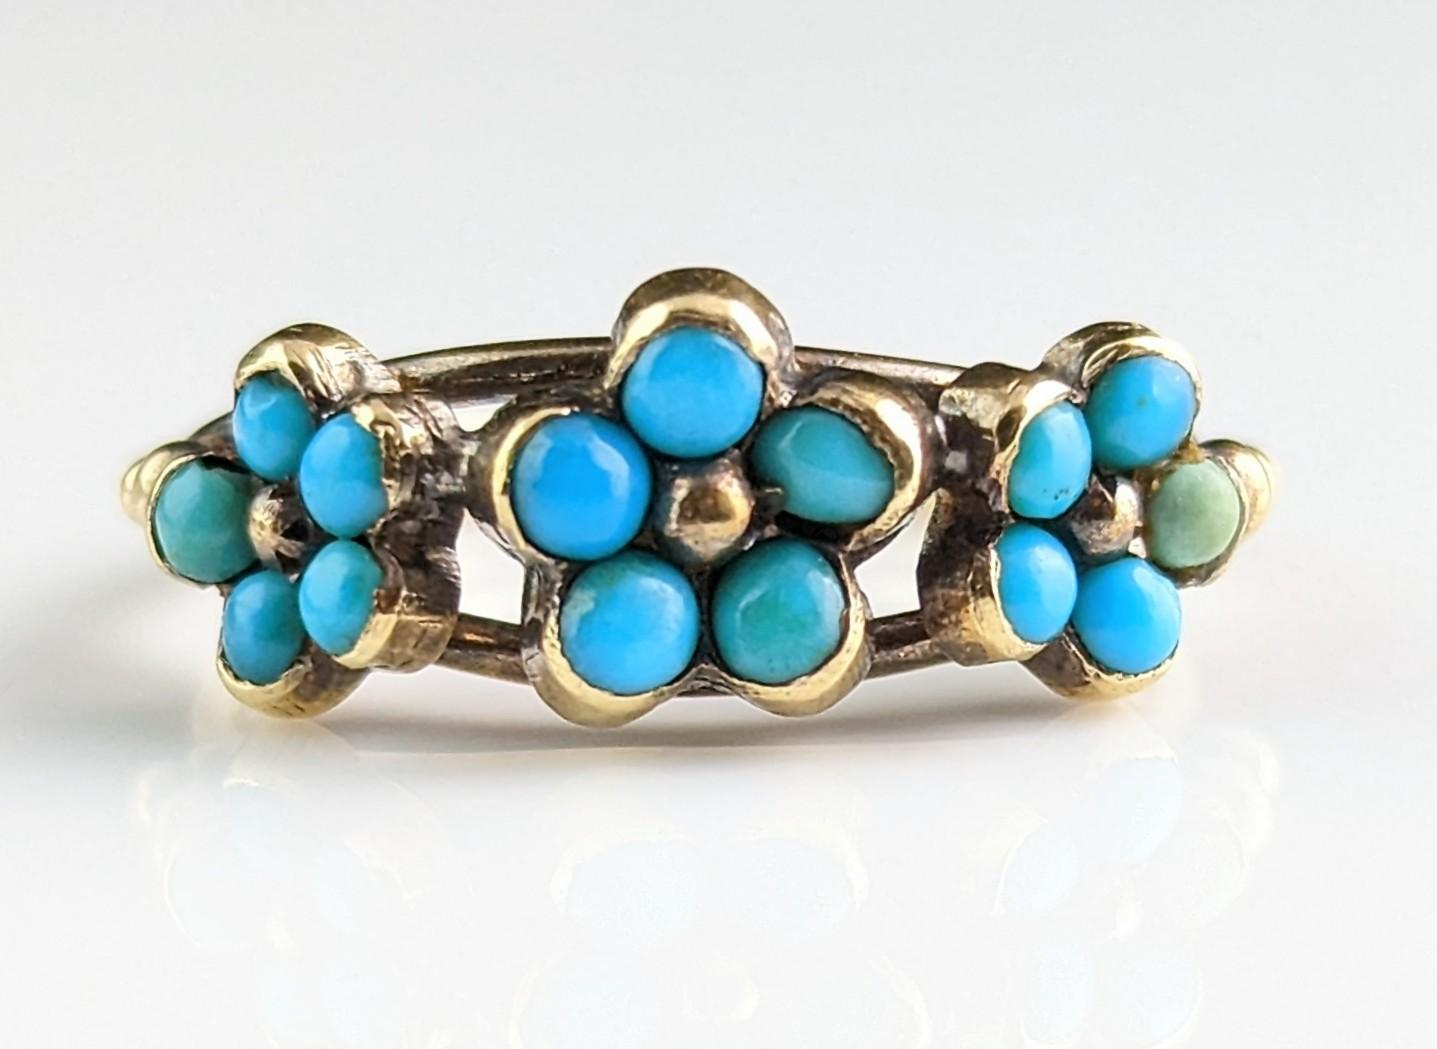 Antique Georgian Triple Flower Ring, Forget Me Not, 18k Gold and Turquoise 7